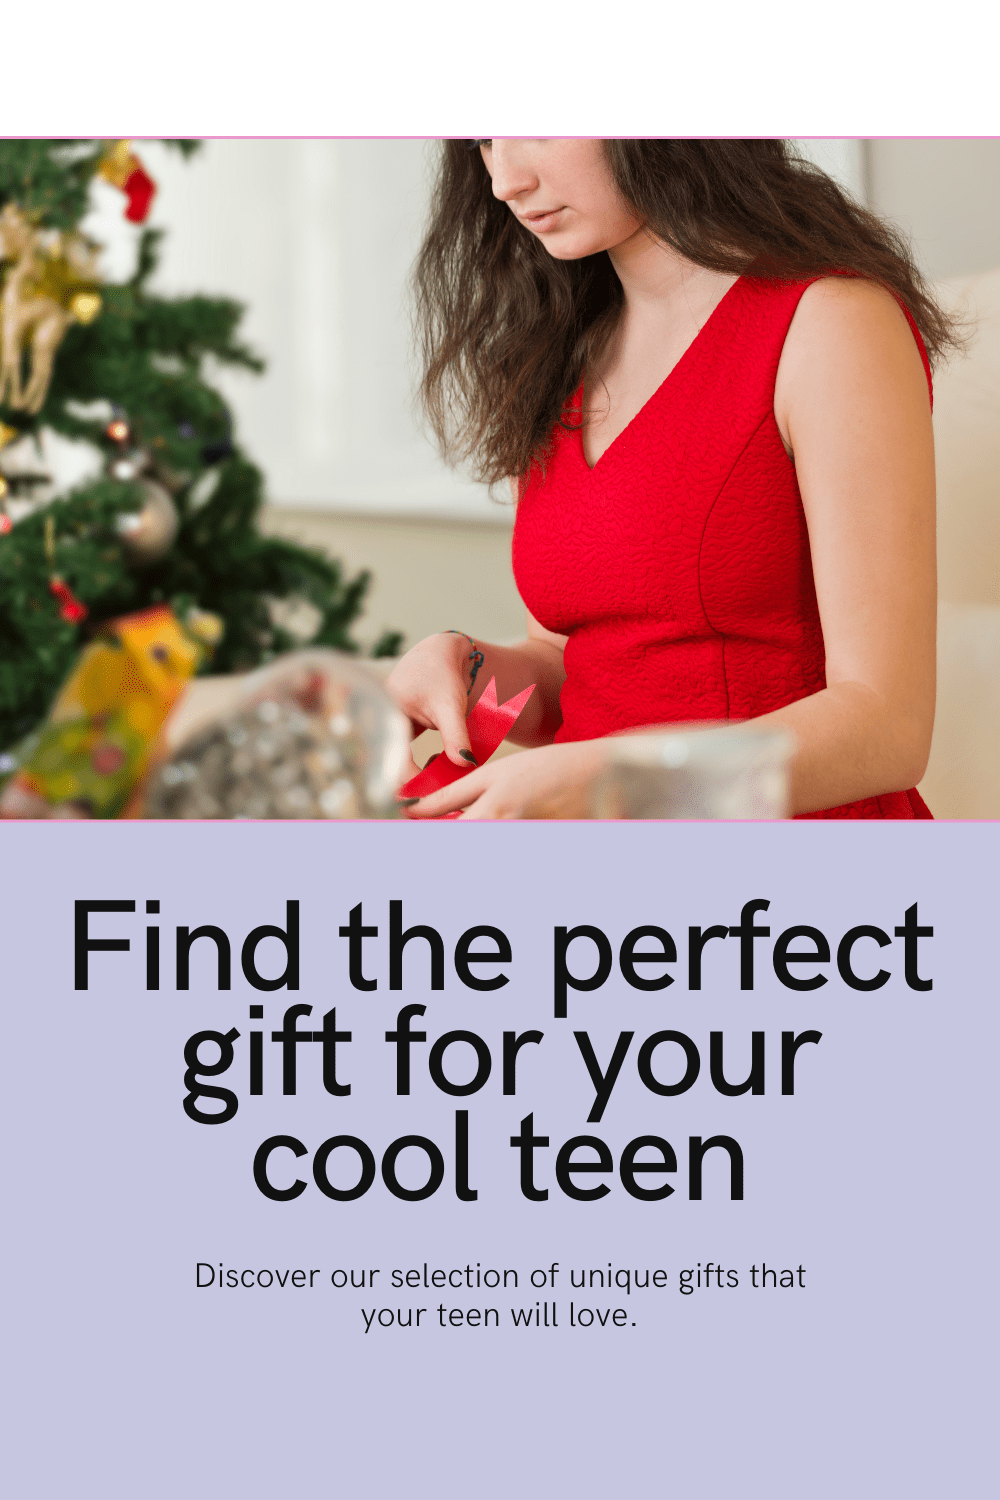 Cool Gifts For Teens They’ll Love